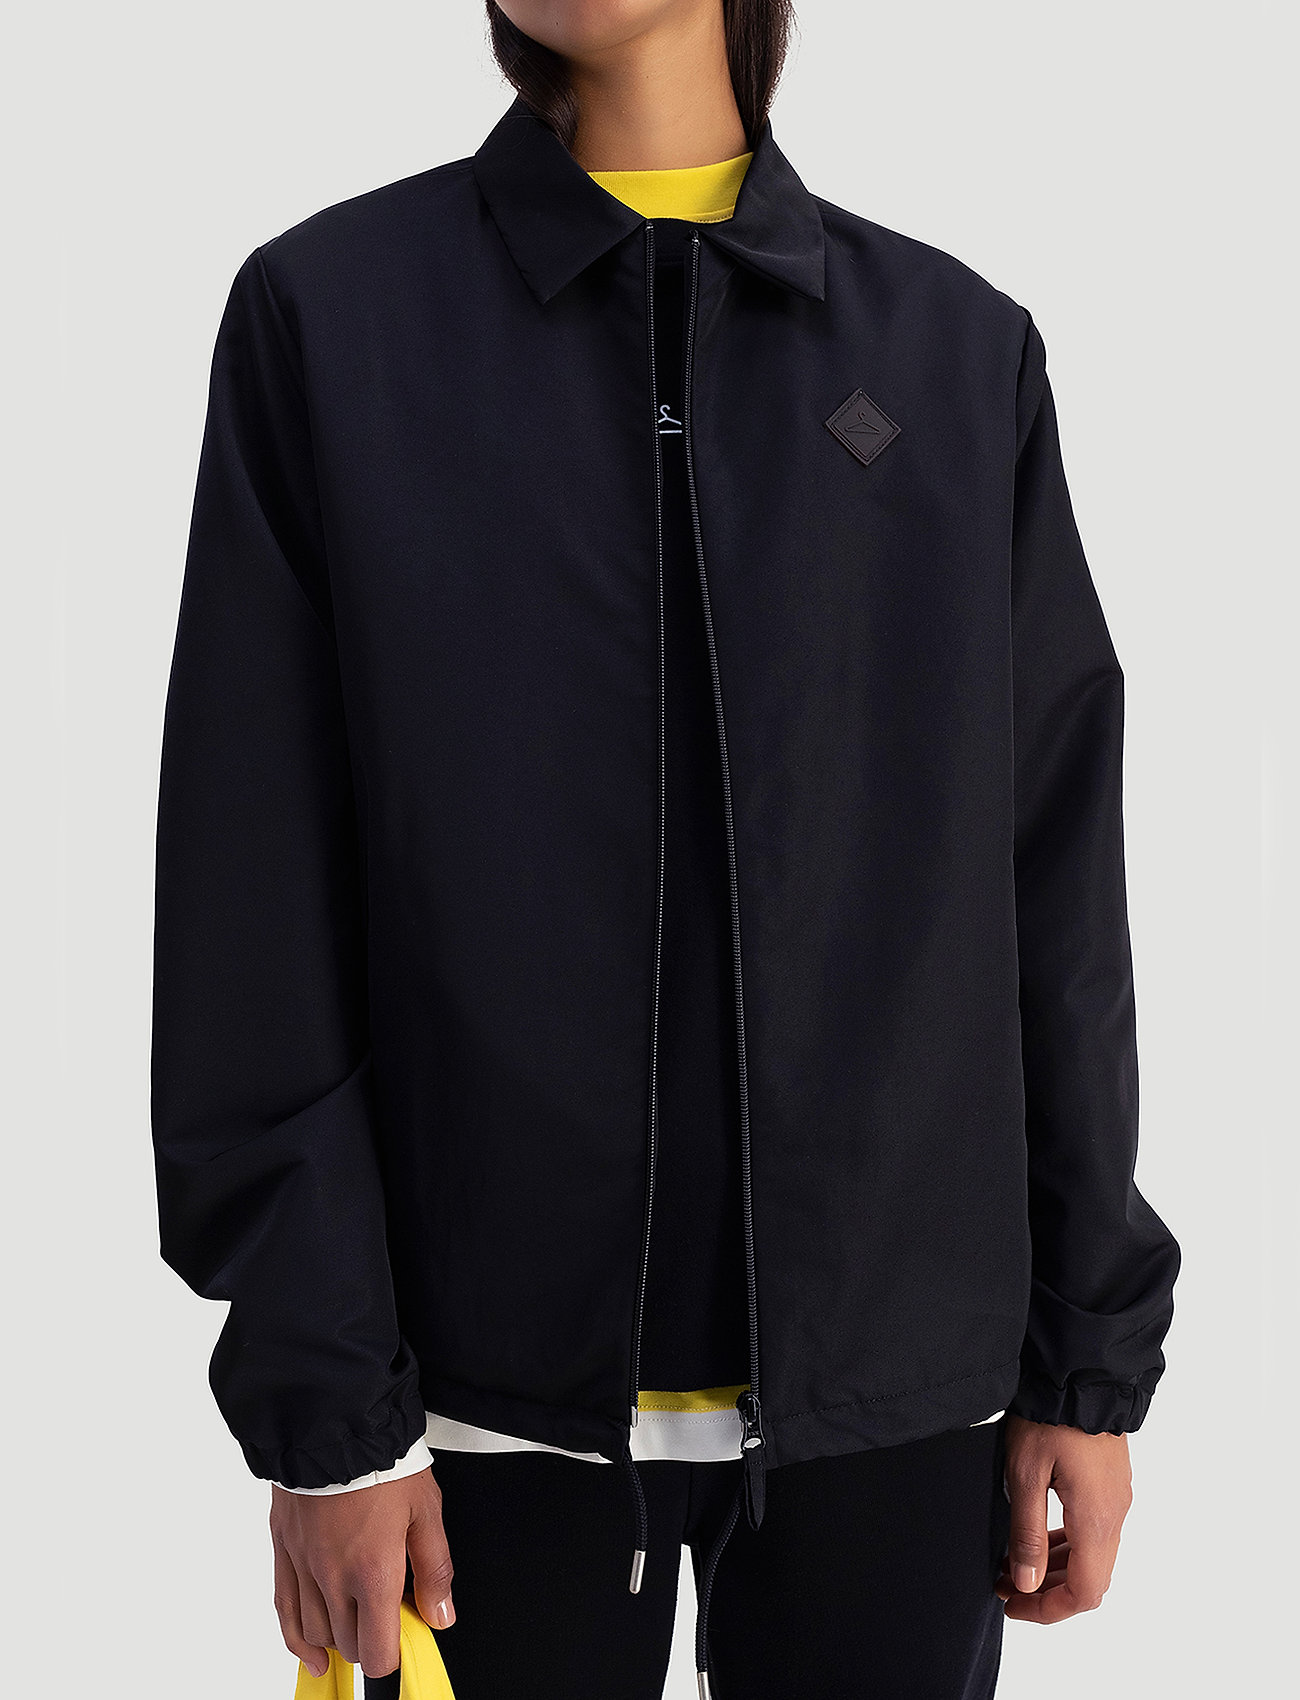 Hanger by Holzweiler Hanger Coach Jacket - 153 €. Buy Light Jackets from  Hanger by Holzweiler online at . Fast delivery and easy returns